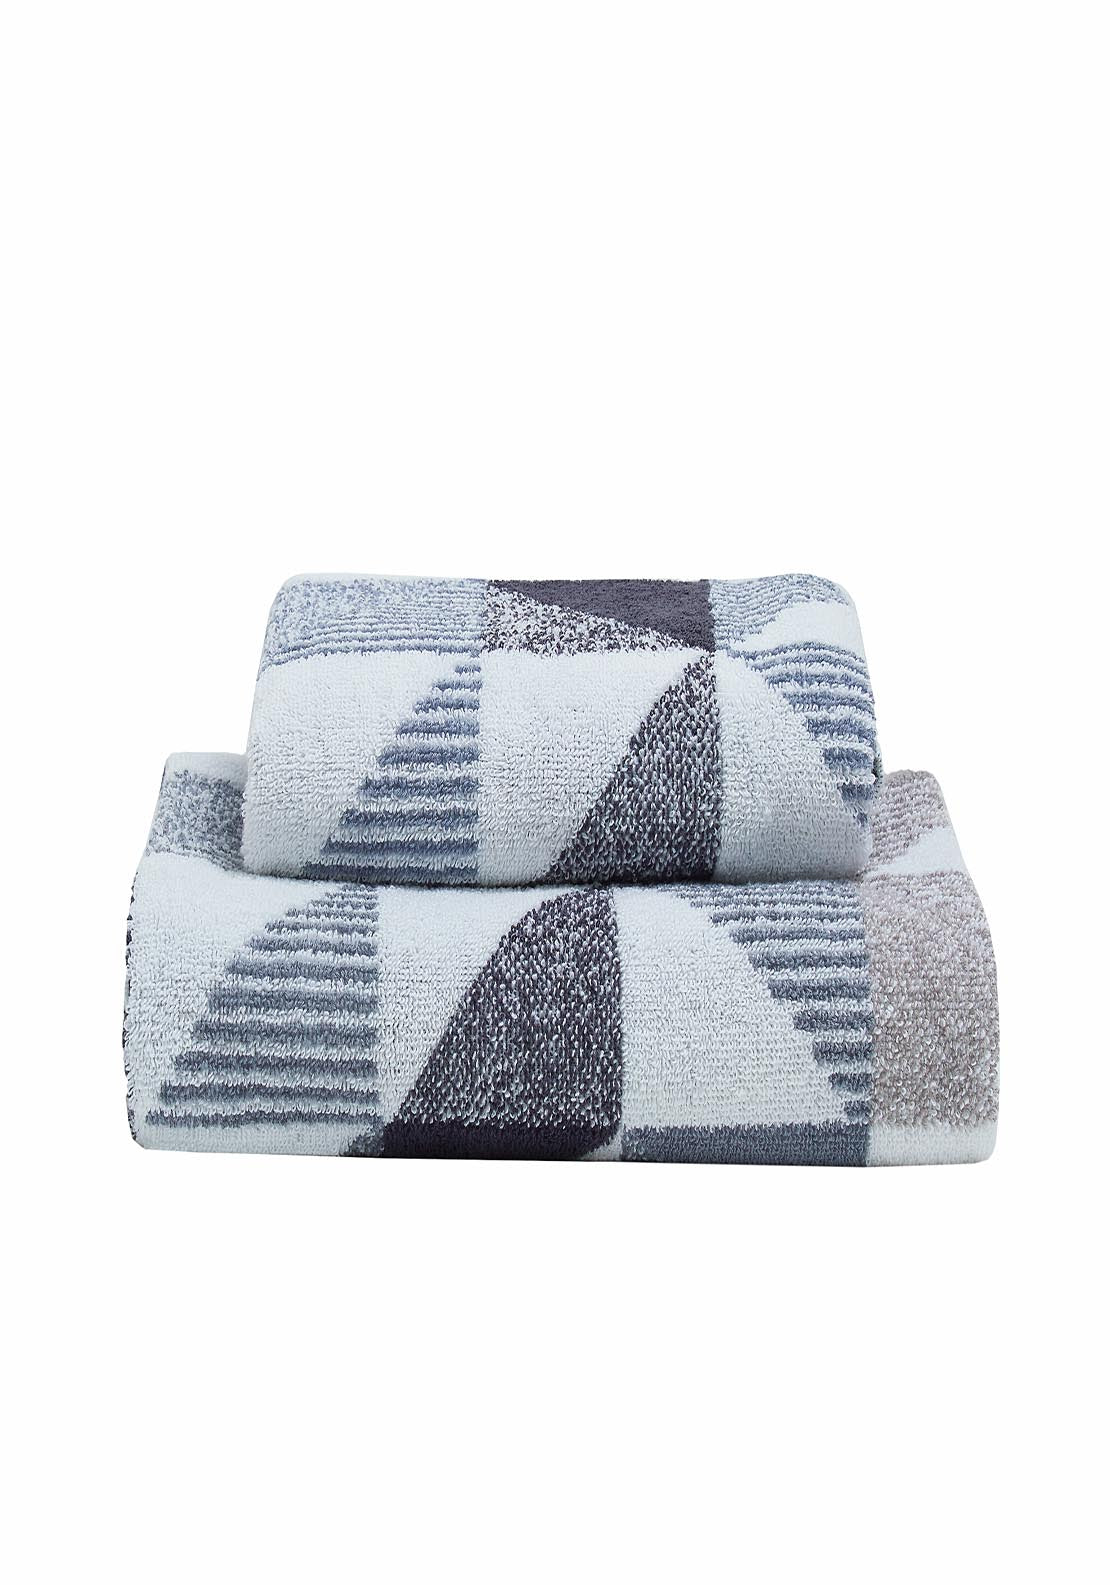 The Home Collection Hendra Hand Towel - Monochrome 2 Shaws Department Stores